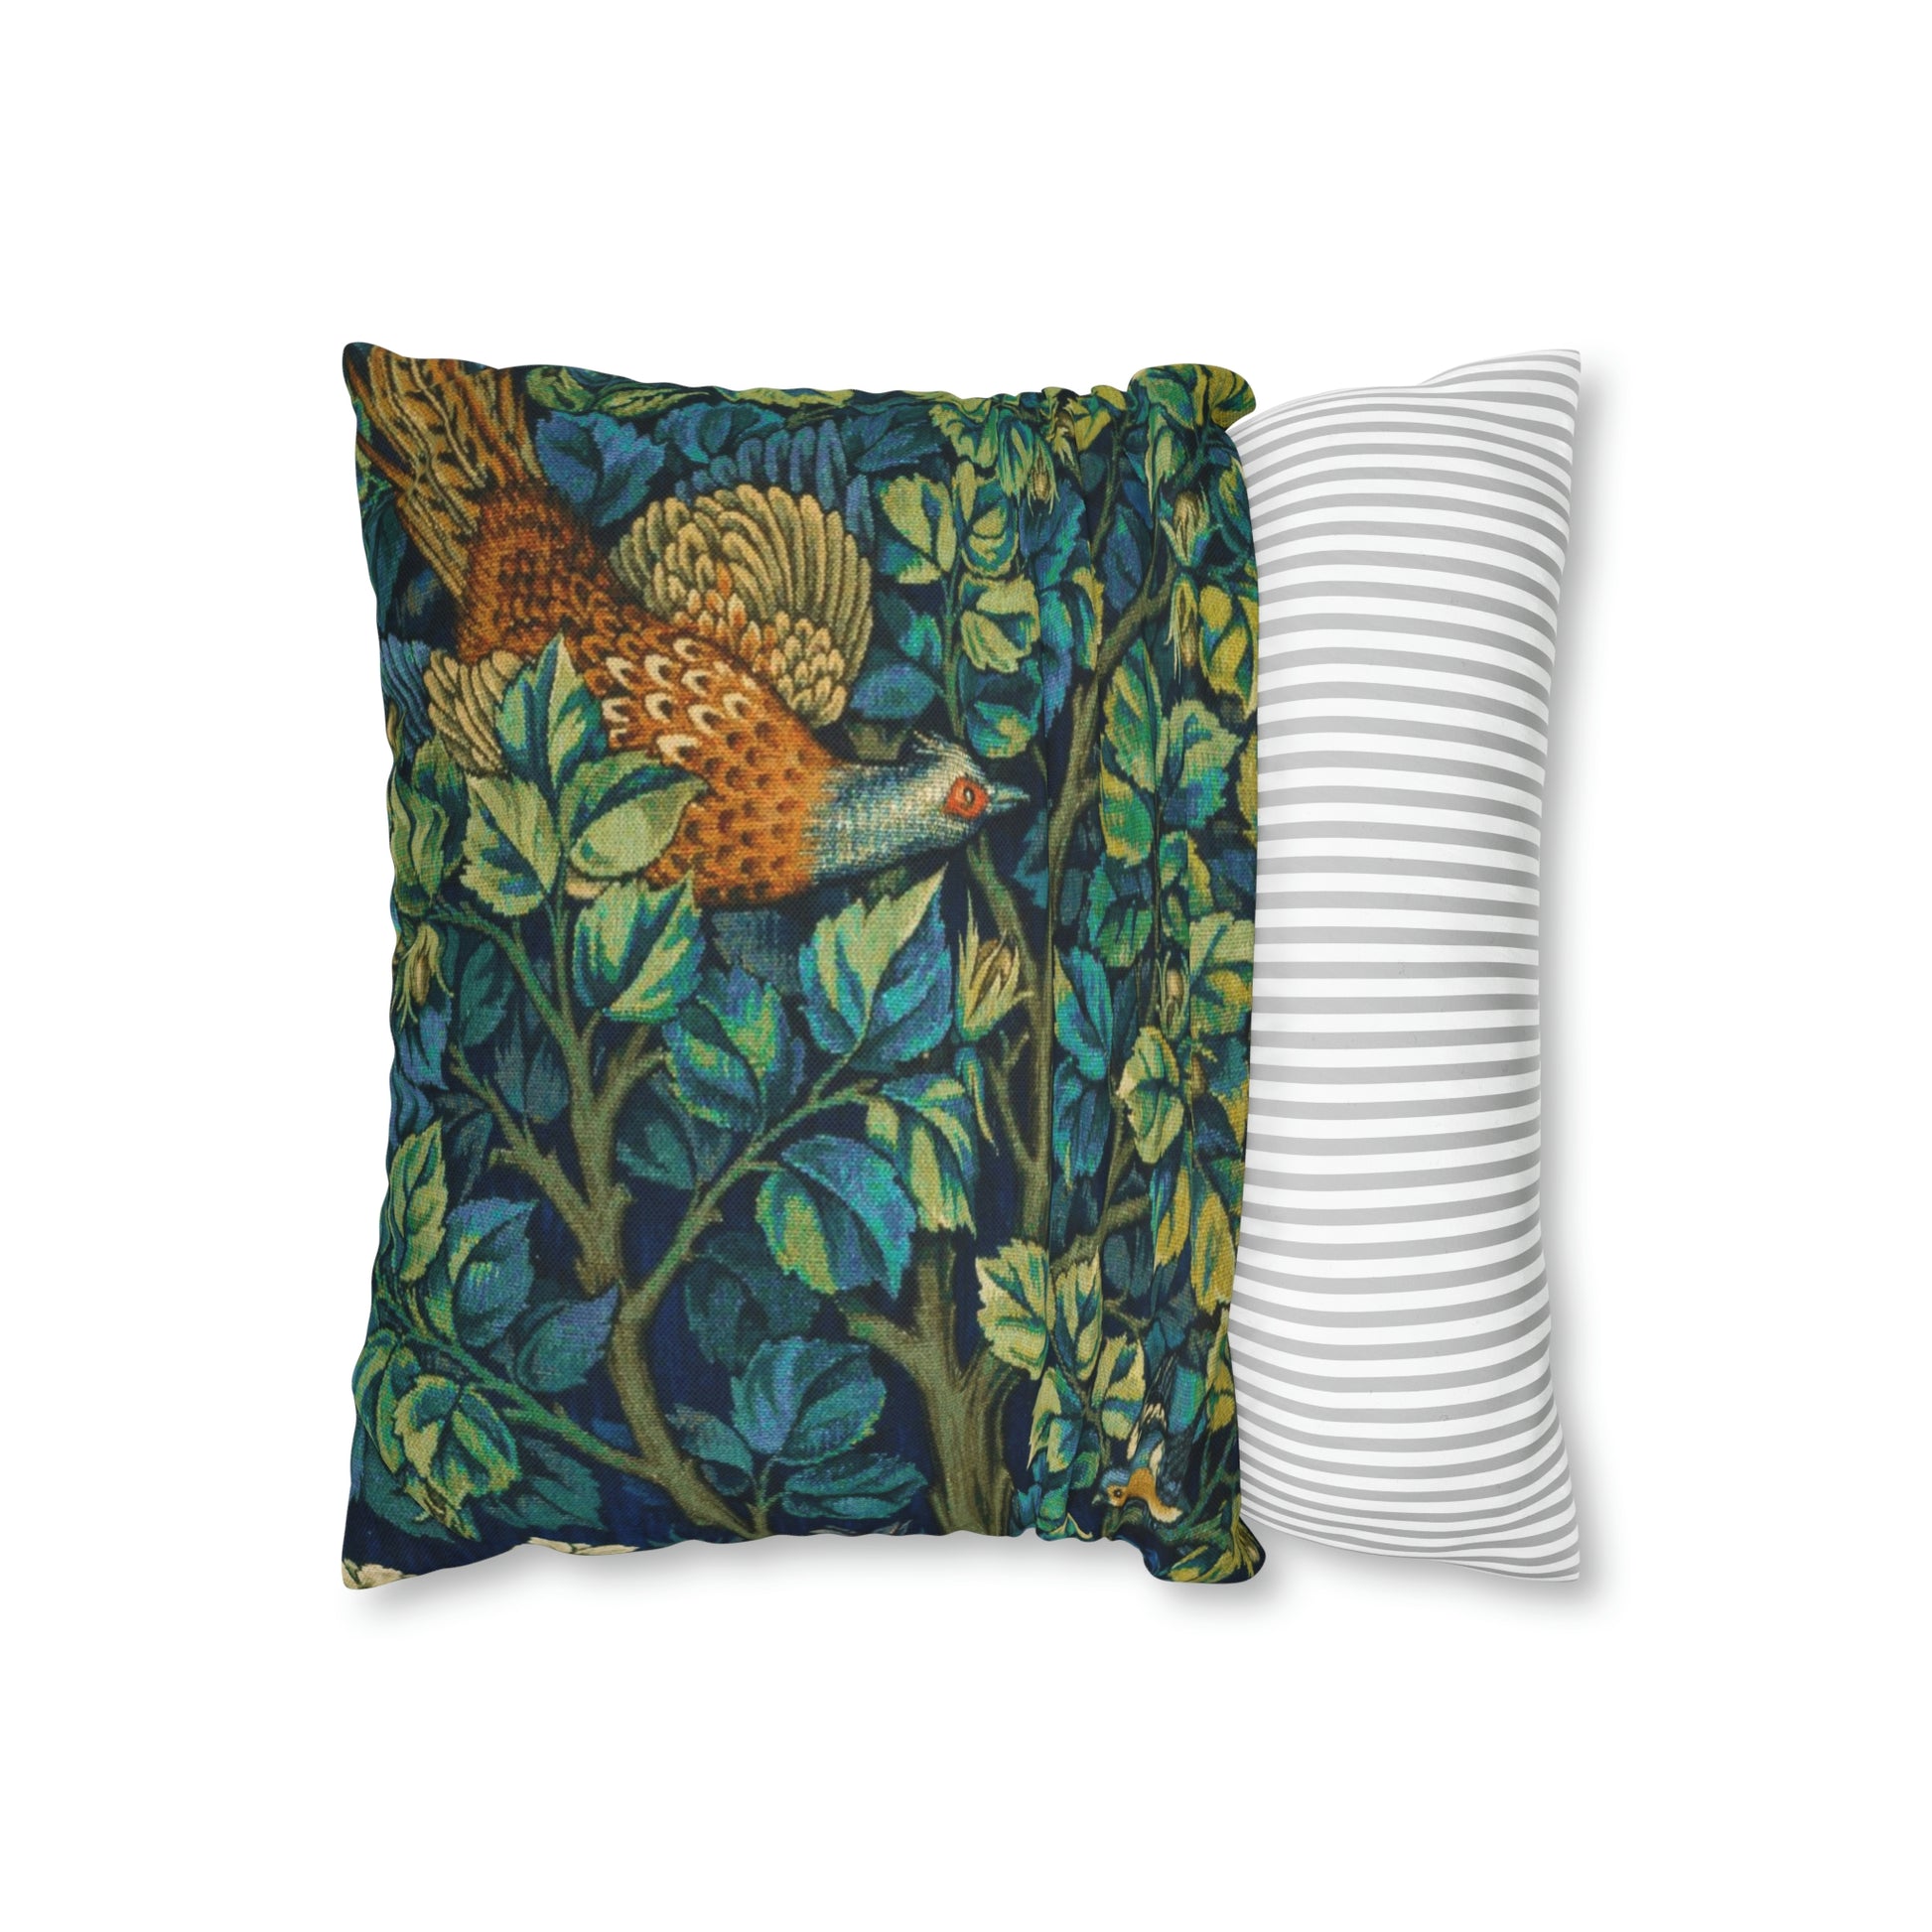 william-morris-co-cushion-cover-pheasant-and-squirrel-collection-pheasant-blue-9